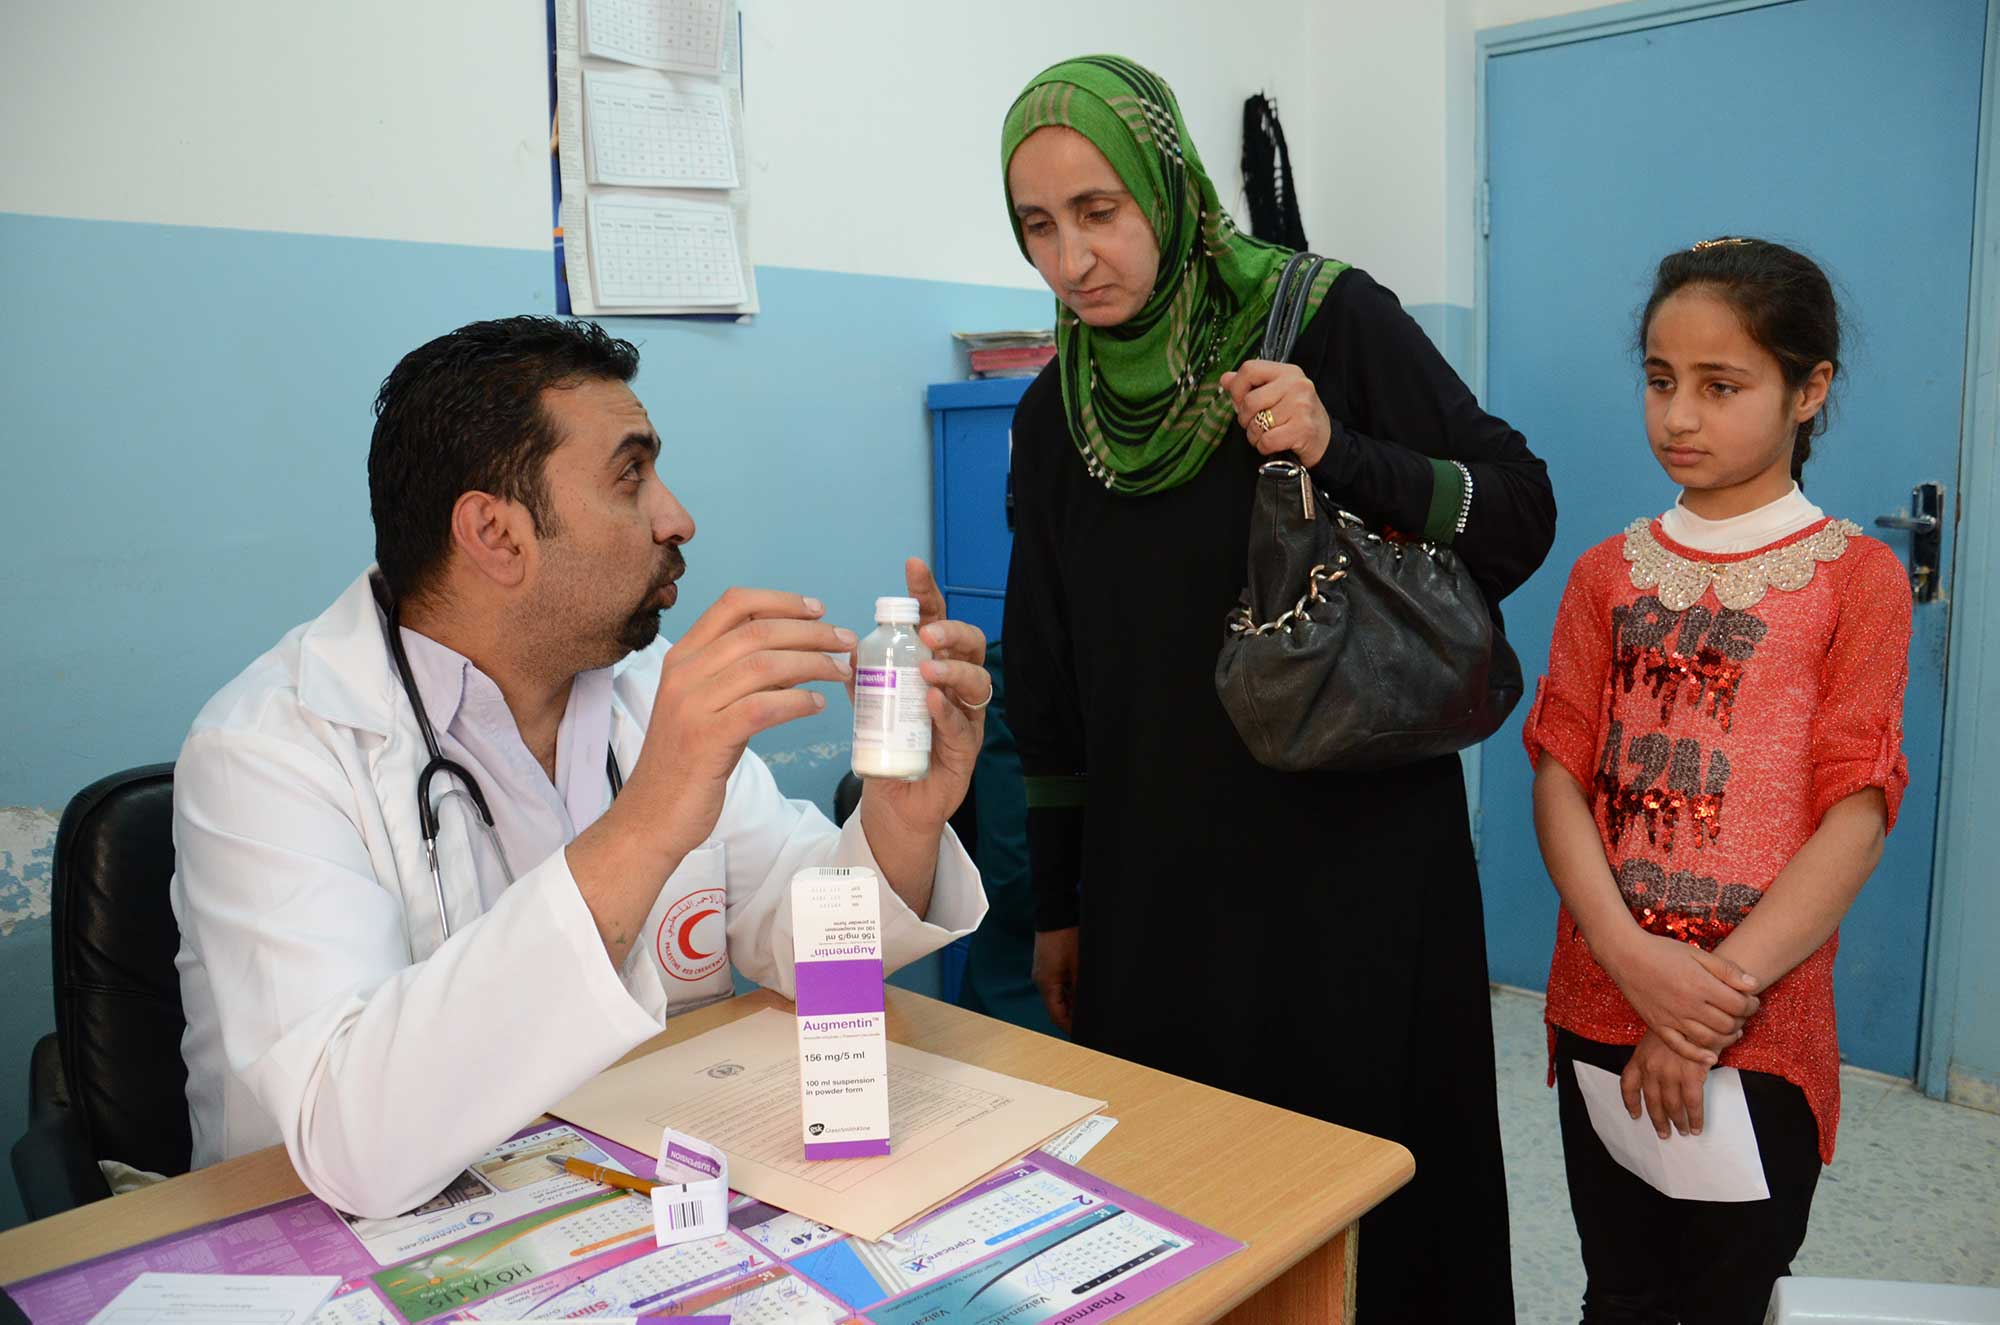 Dr. Qdeimat gives Reema and Shahd instructions for using the medication.